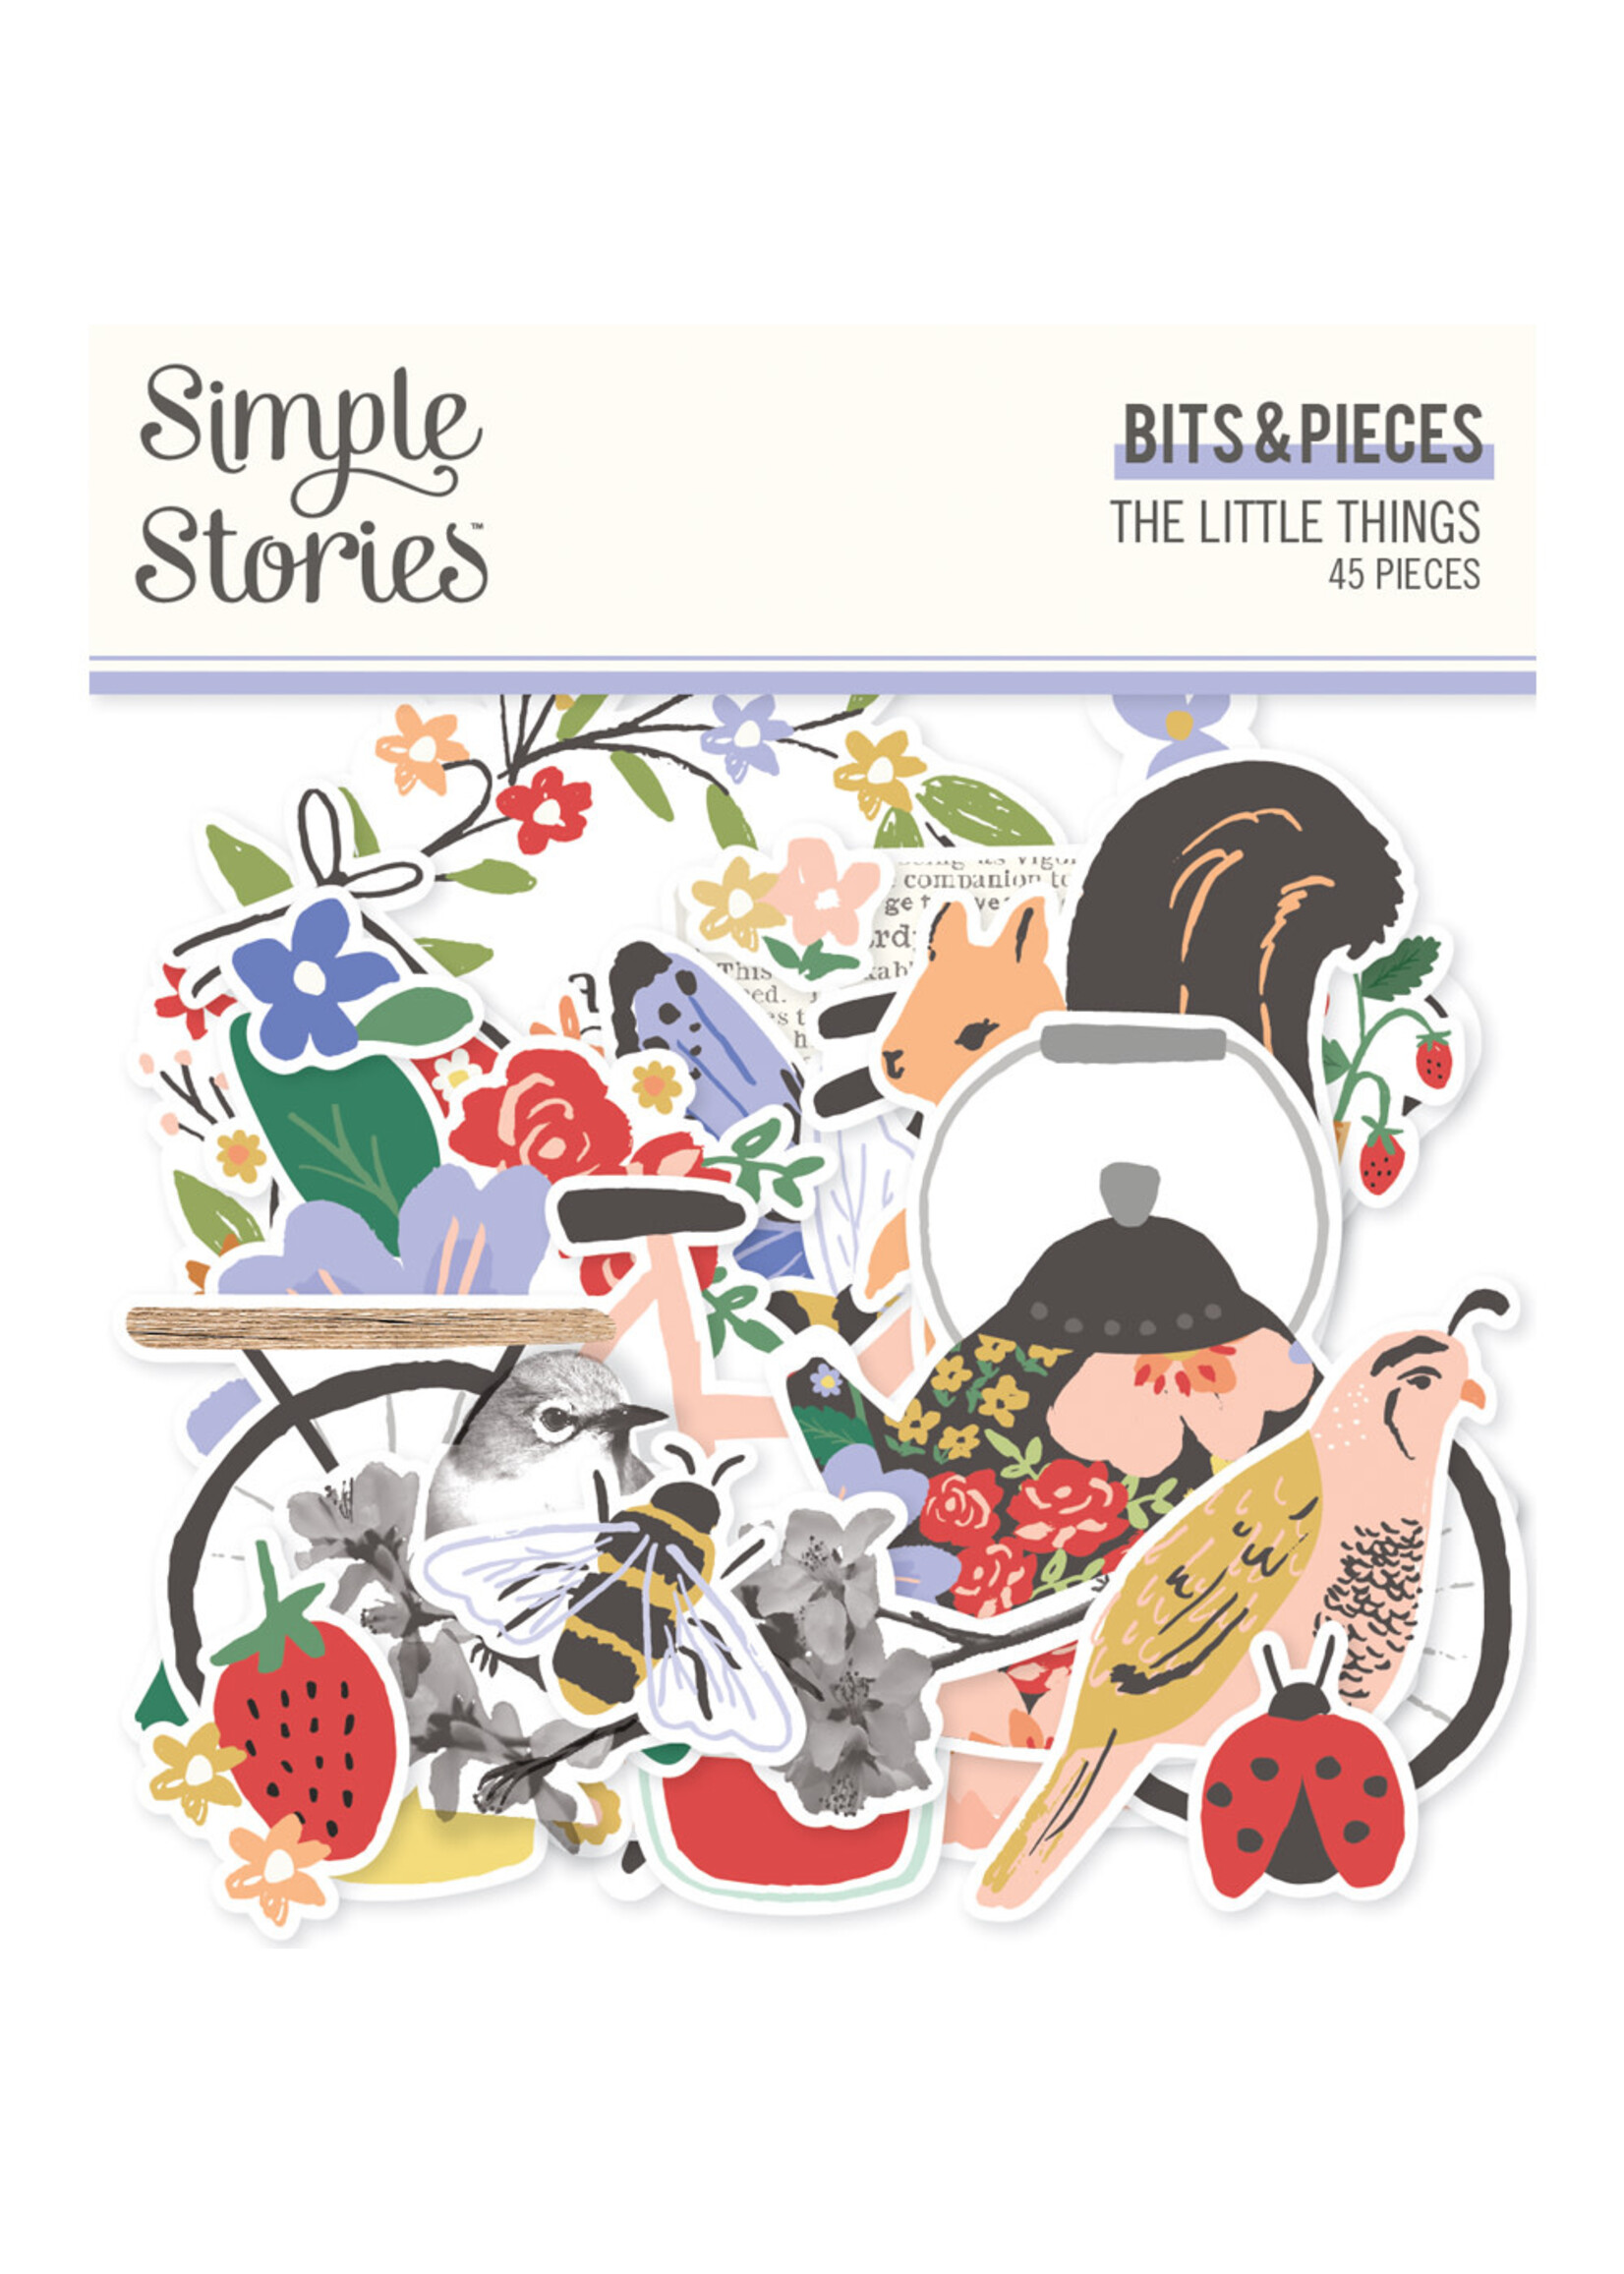 Simple Stories The Little Things - Bits & Pieces